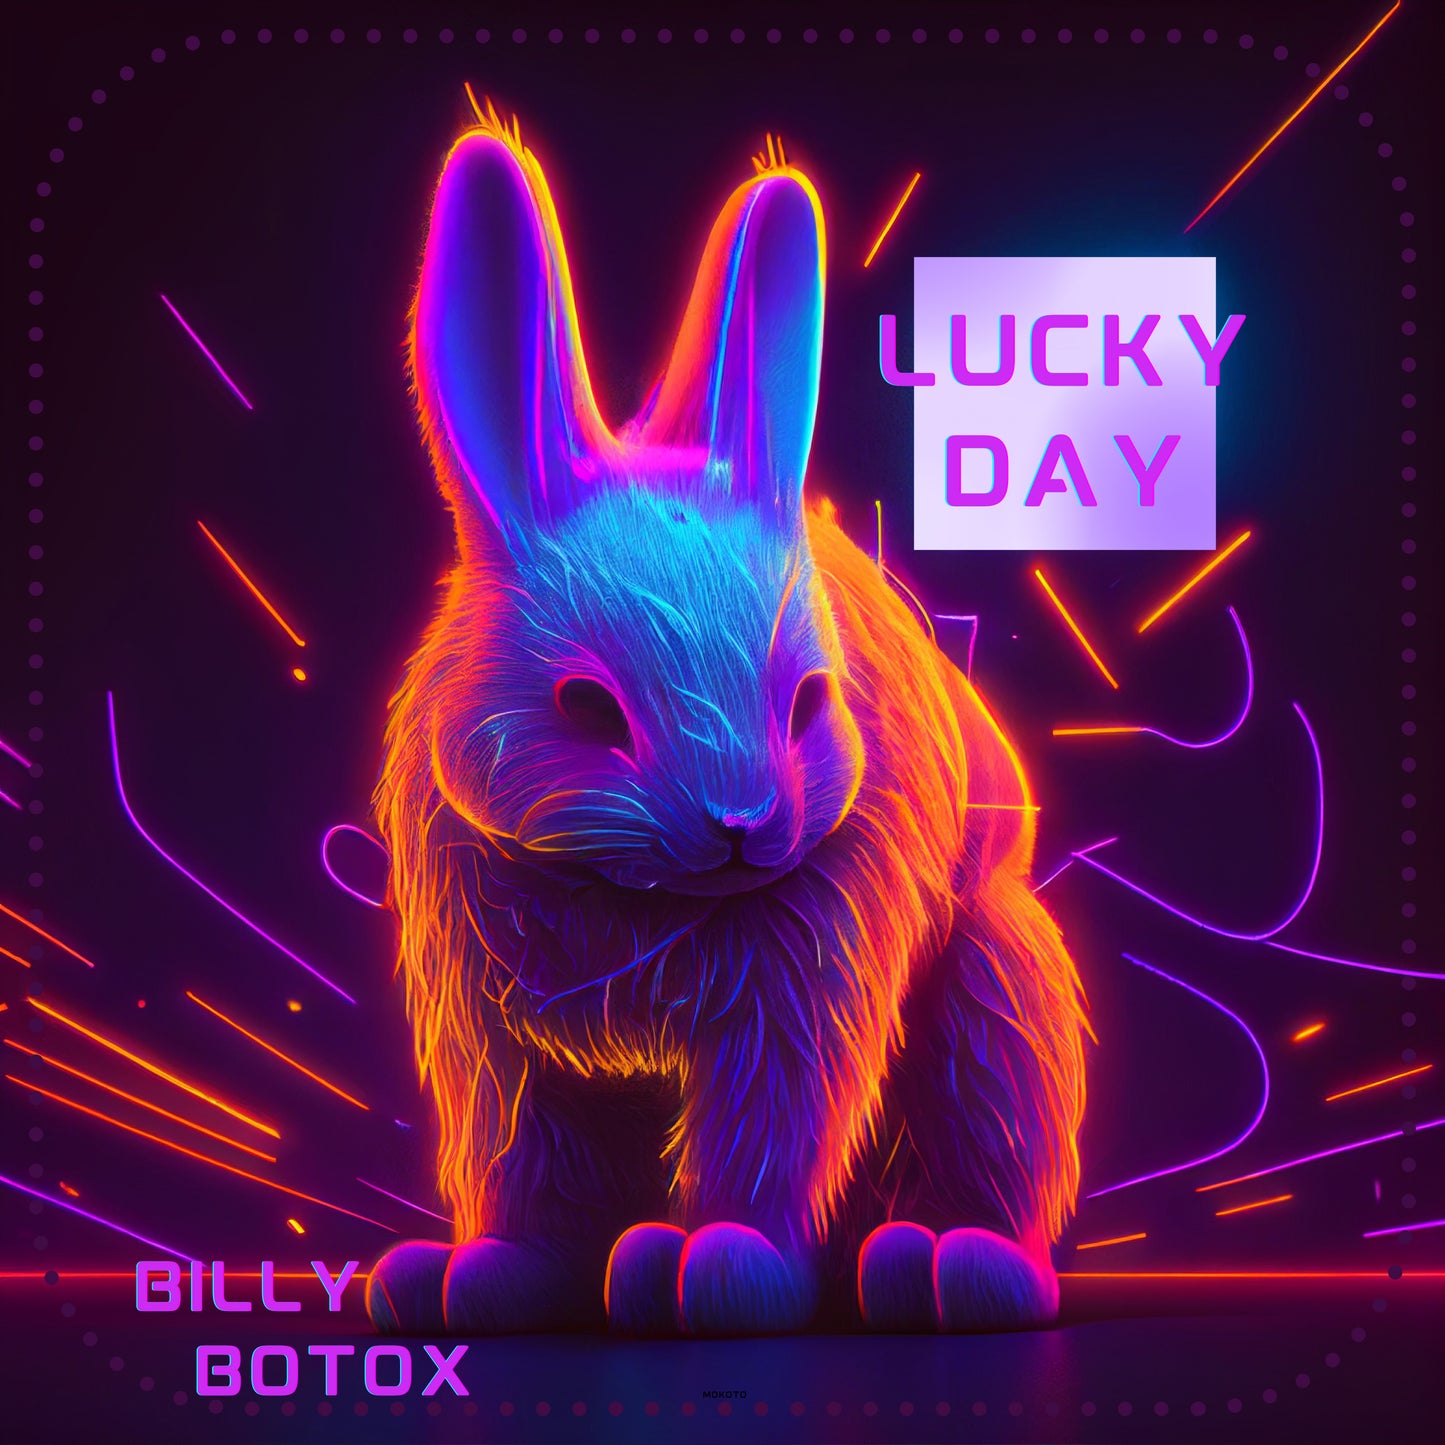 Billy Botox - Single - Lucky Day (High Res Download)